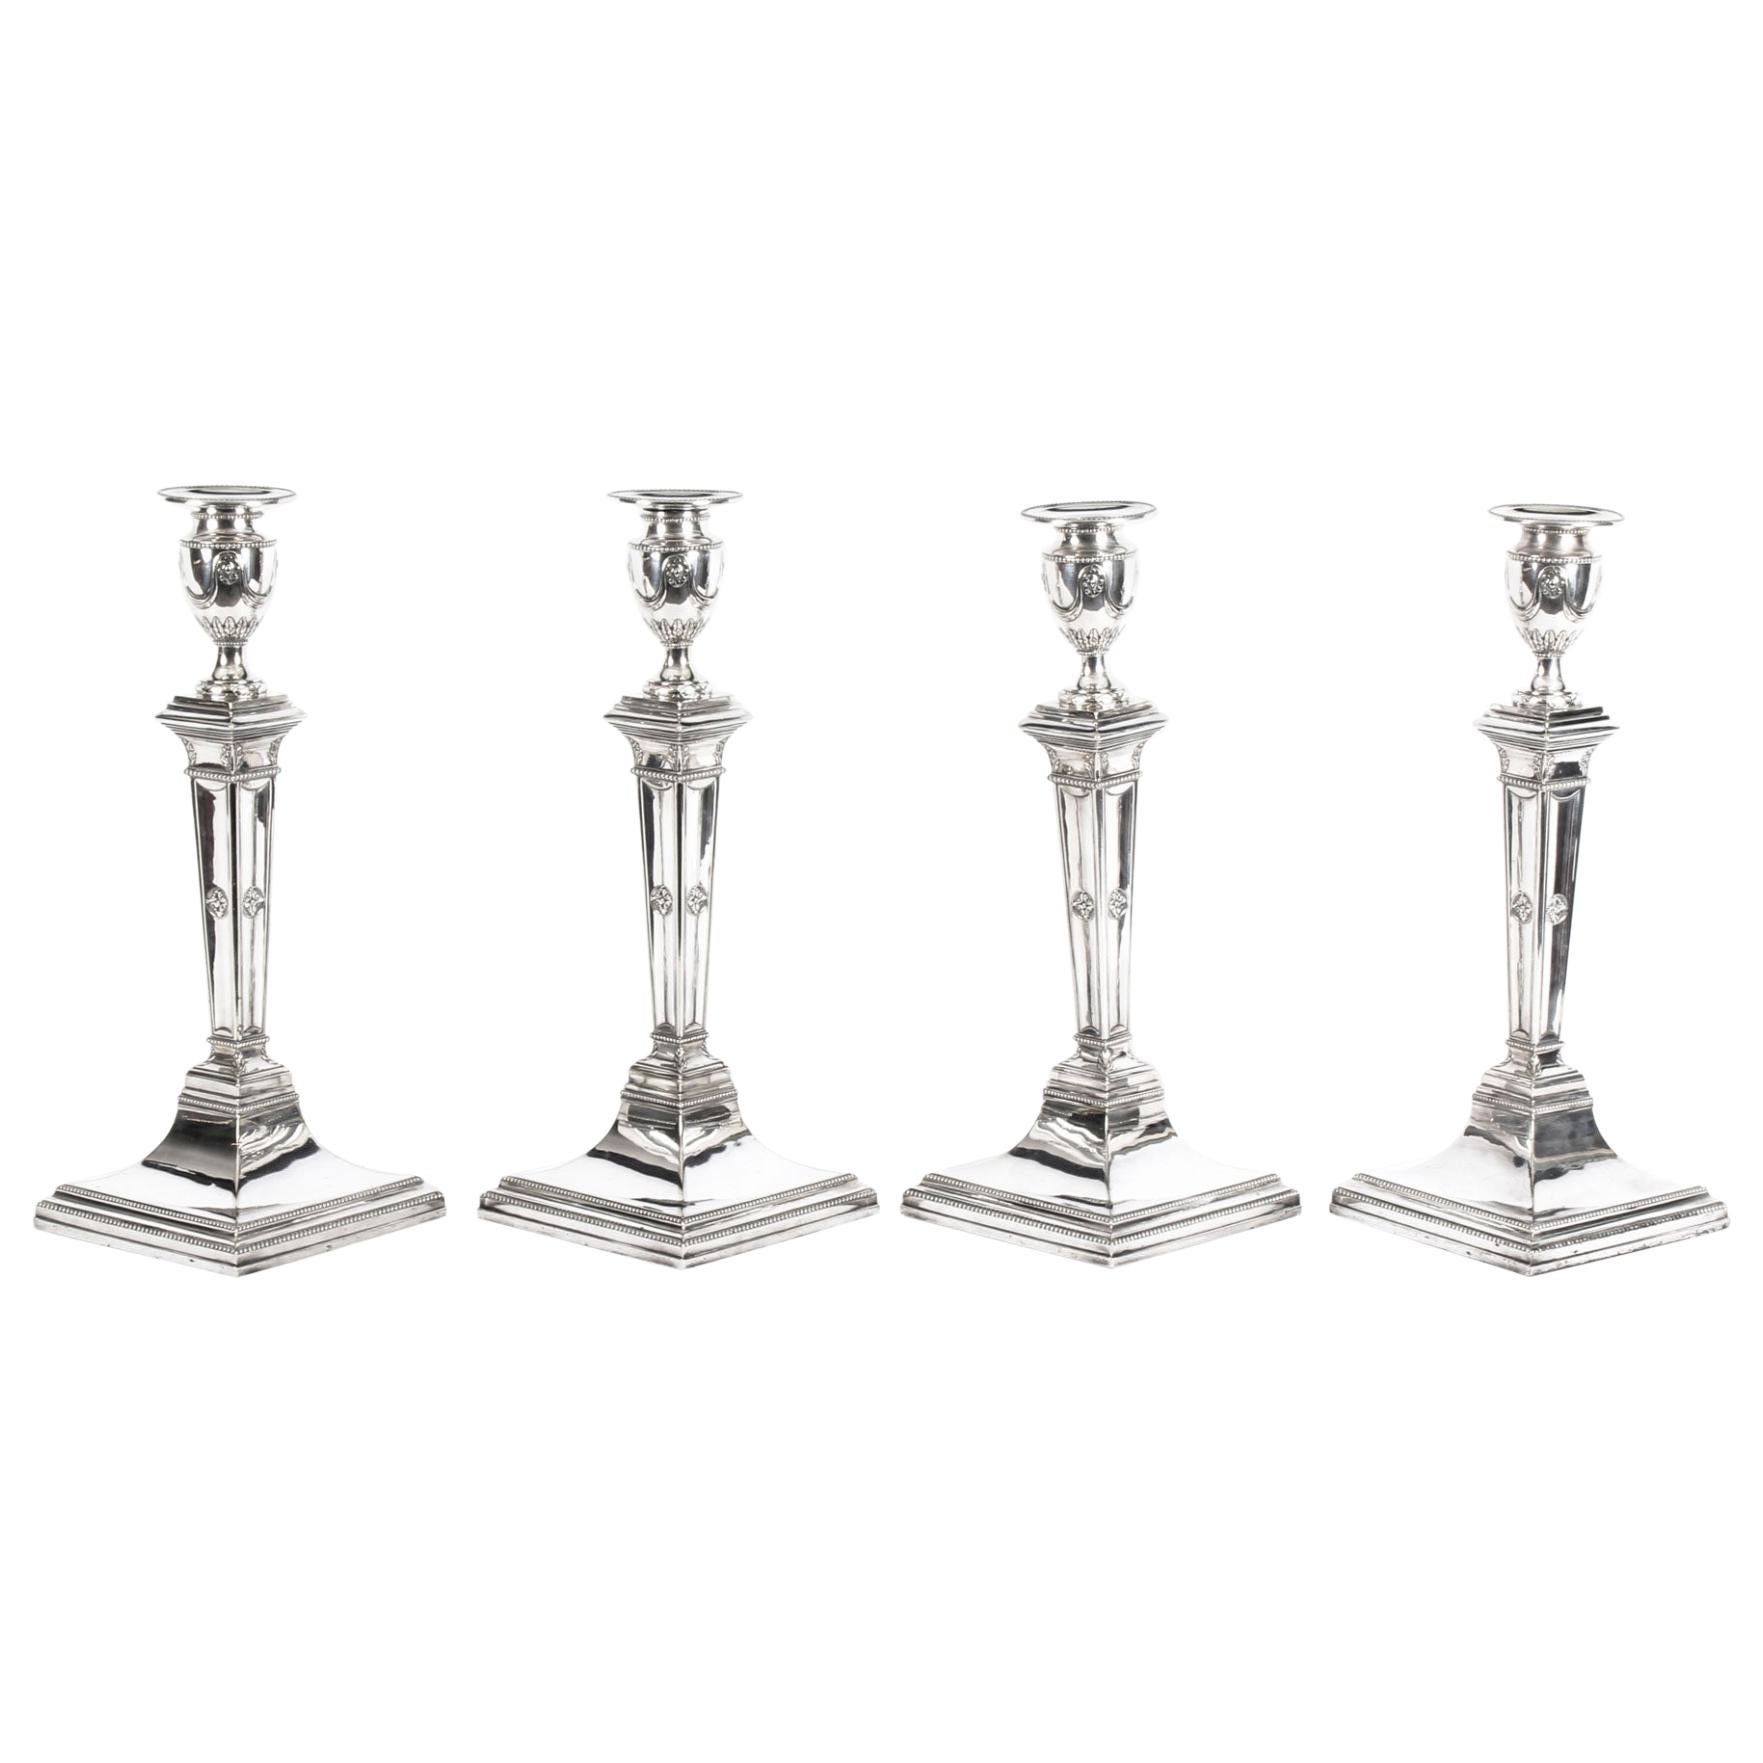 Antique Set of 4 Silver Plated Candlesticks by James Dixon & Sons, 19th Century